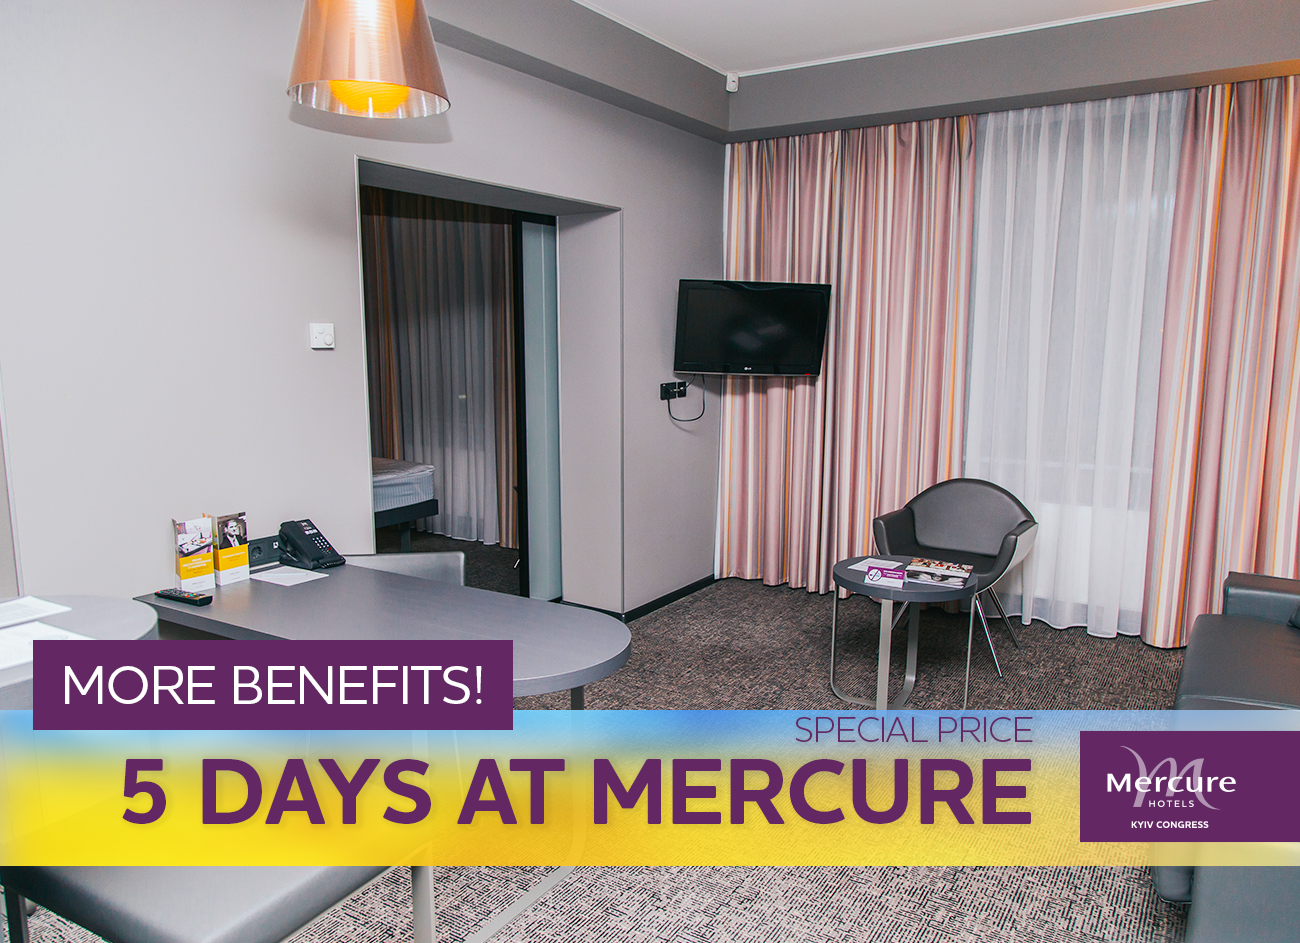 5 days at Mercure. Hot price!